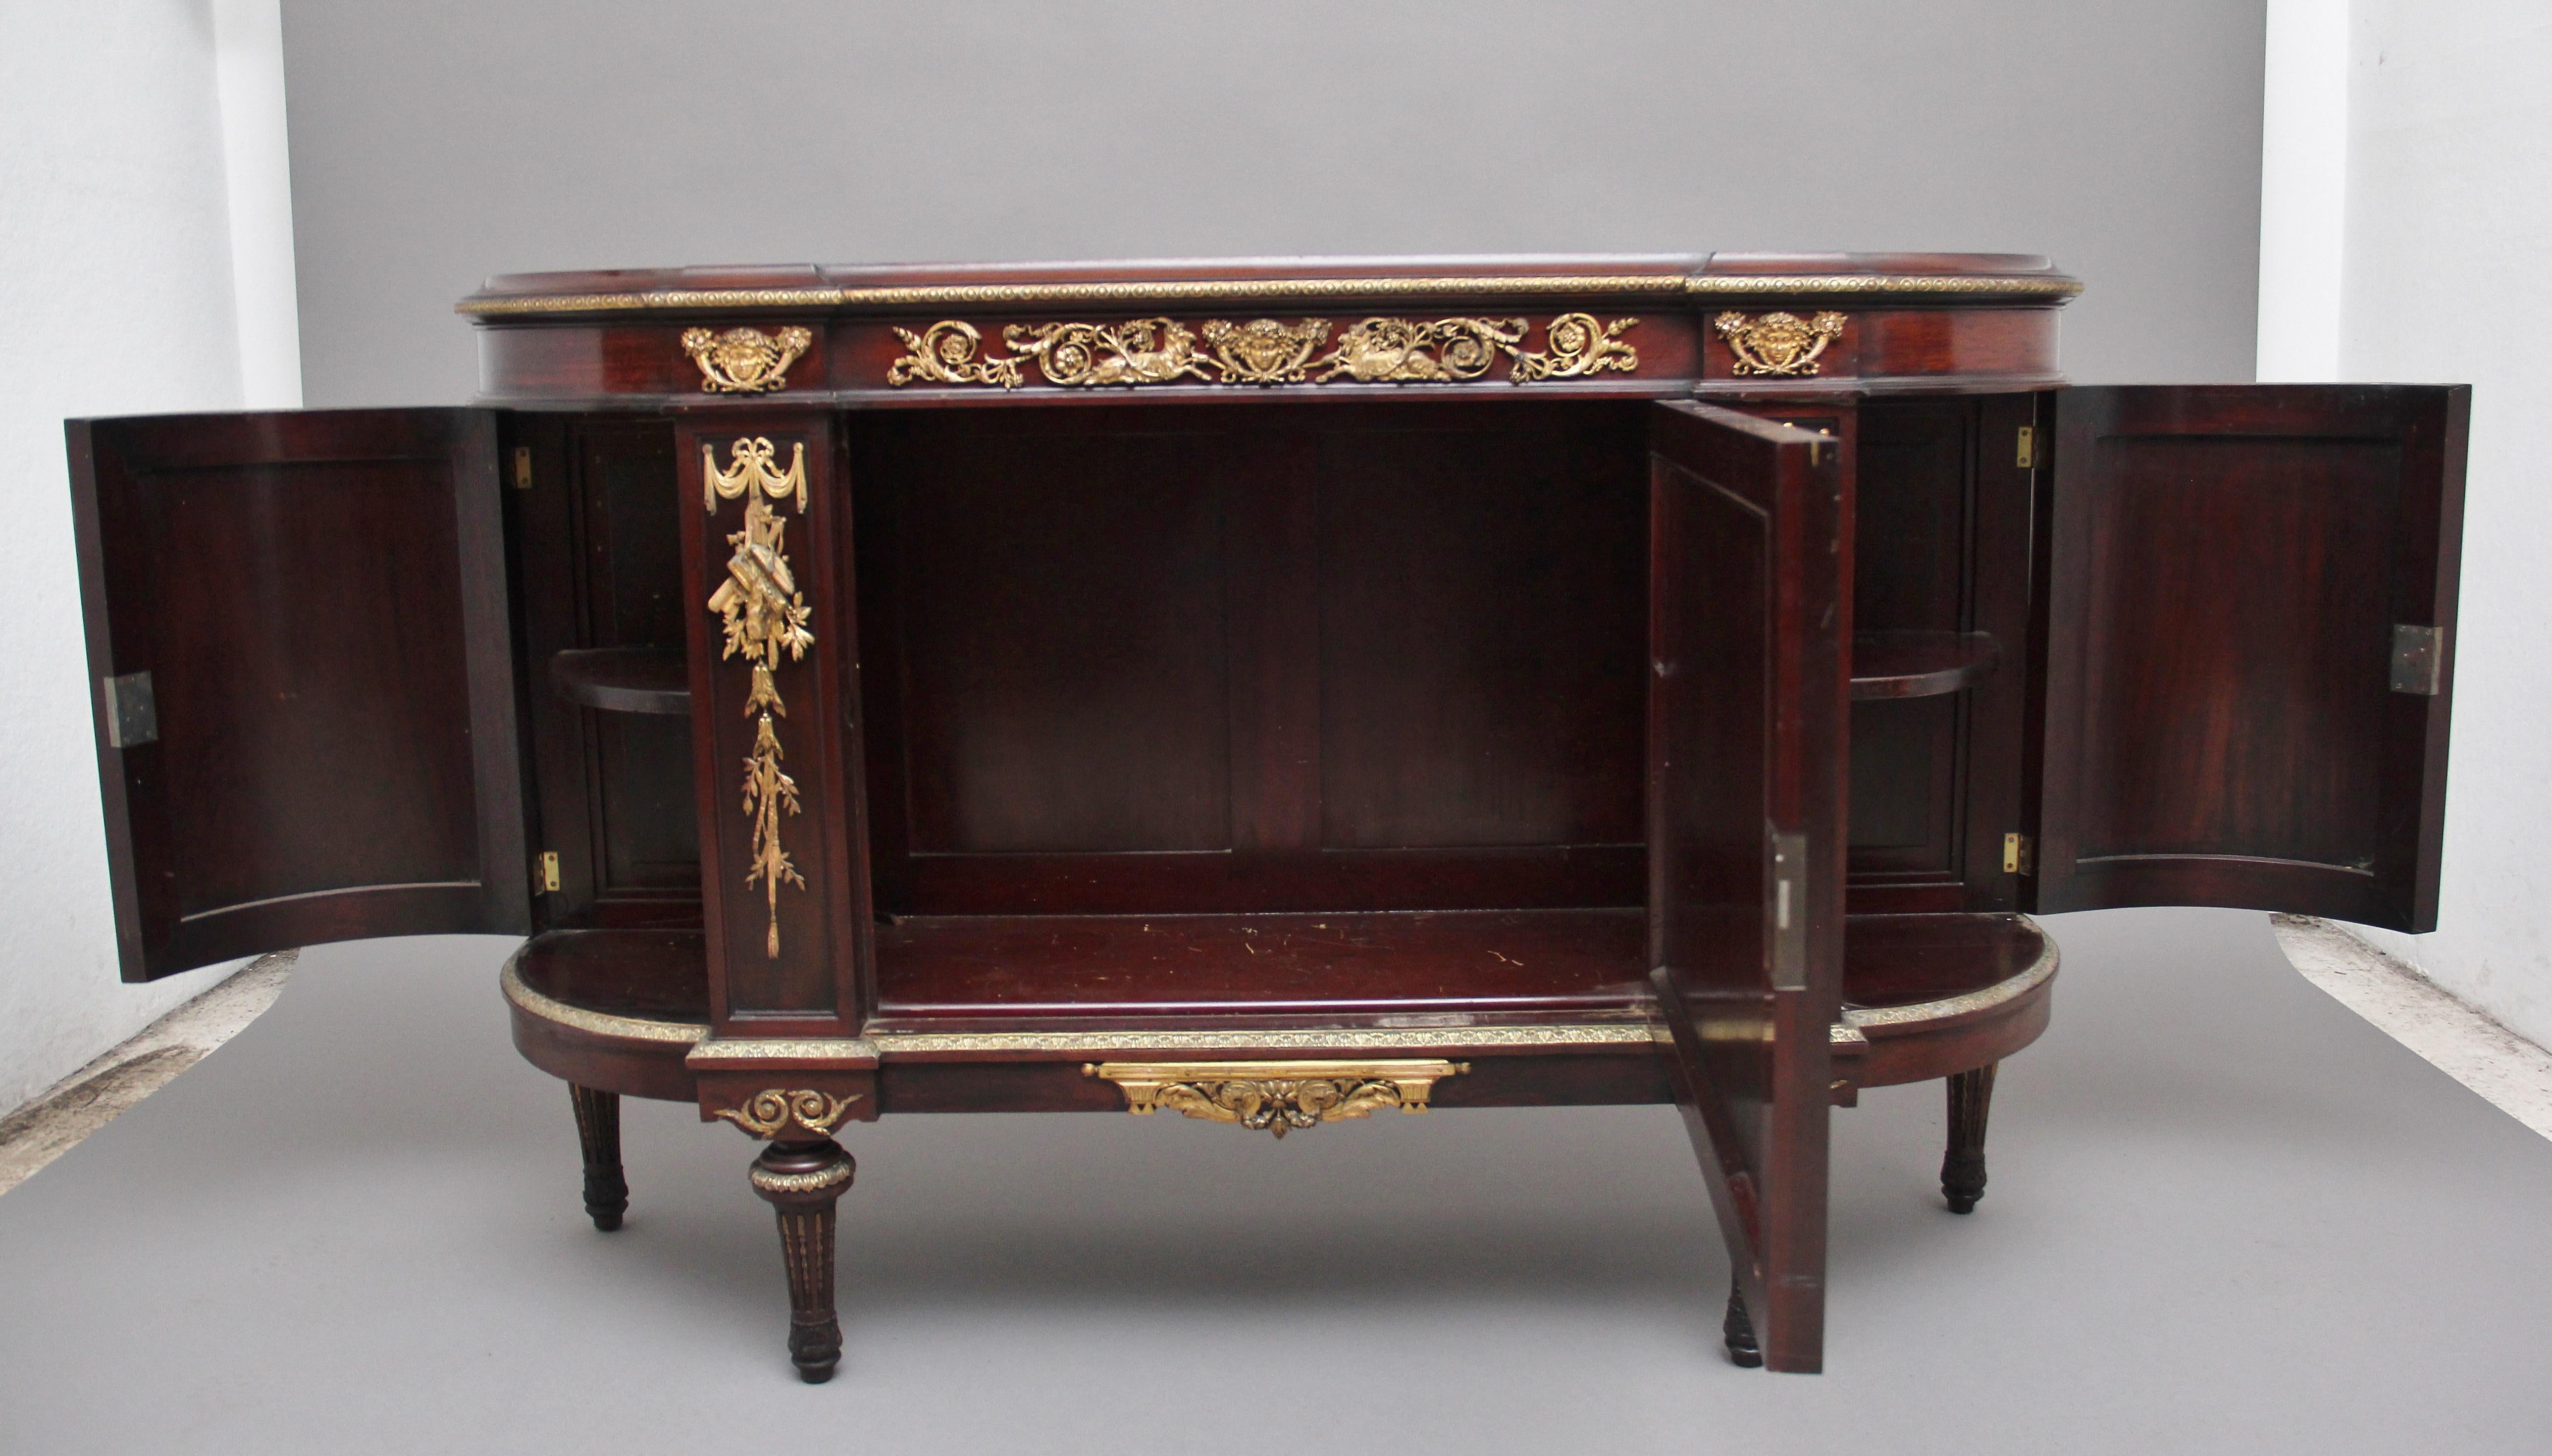 19th century French mahogany cabinet, the shaped and moulded edge top having ormolu beading running underneath, the frieze decorated with decorative ormolu mounts, a cupboard below with the door having a painted panel depicting a French countryside